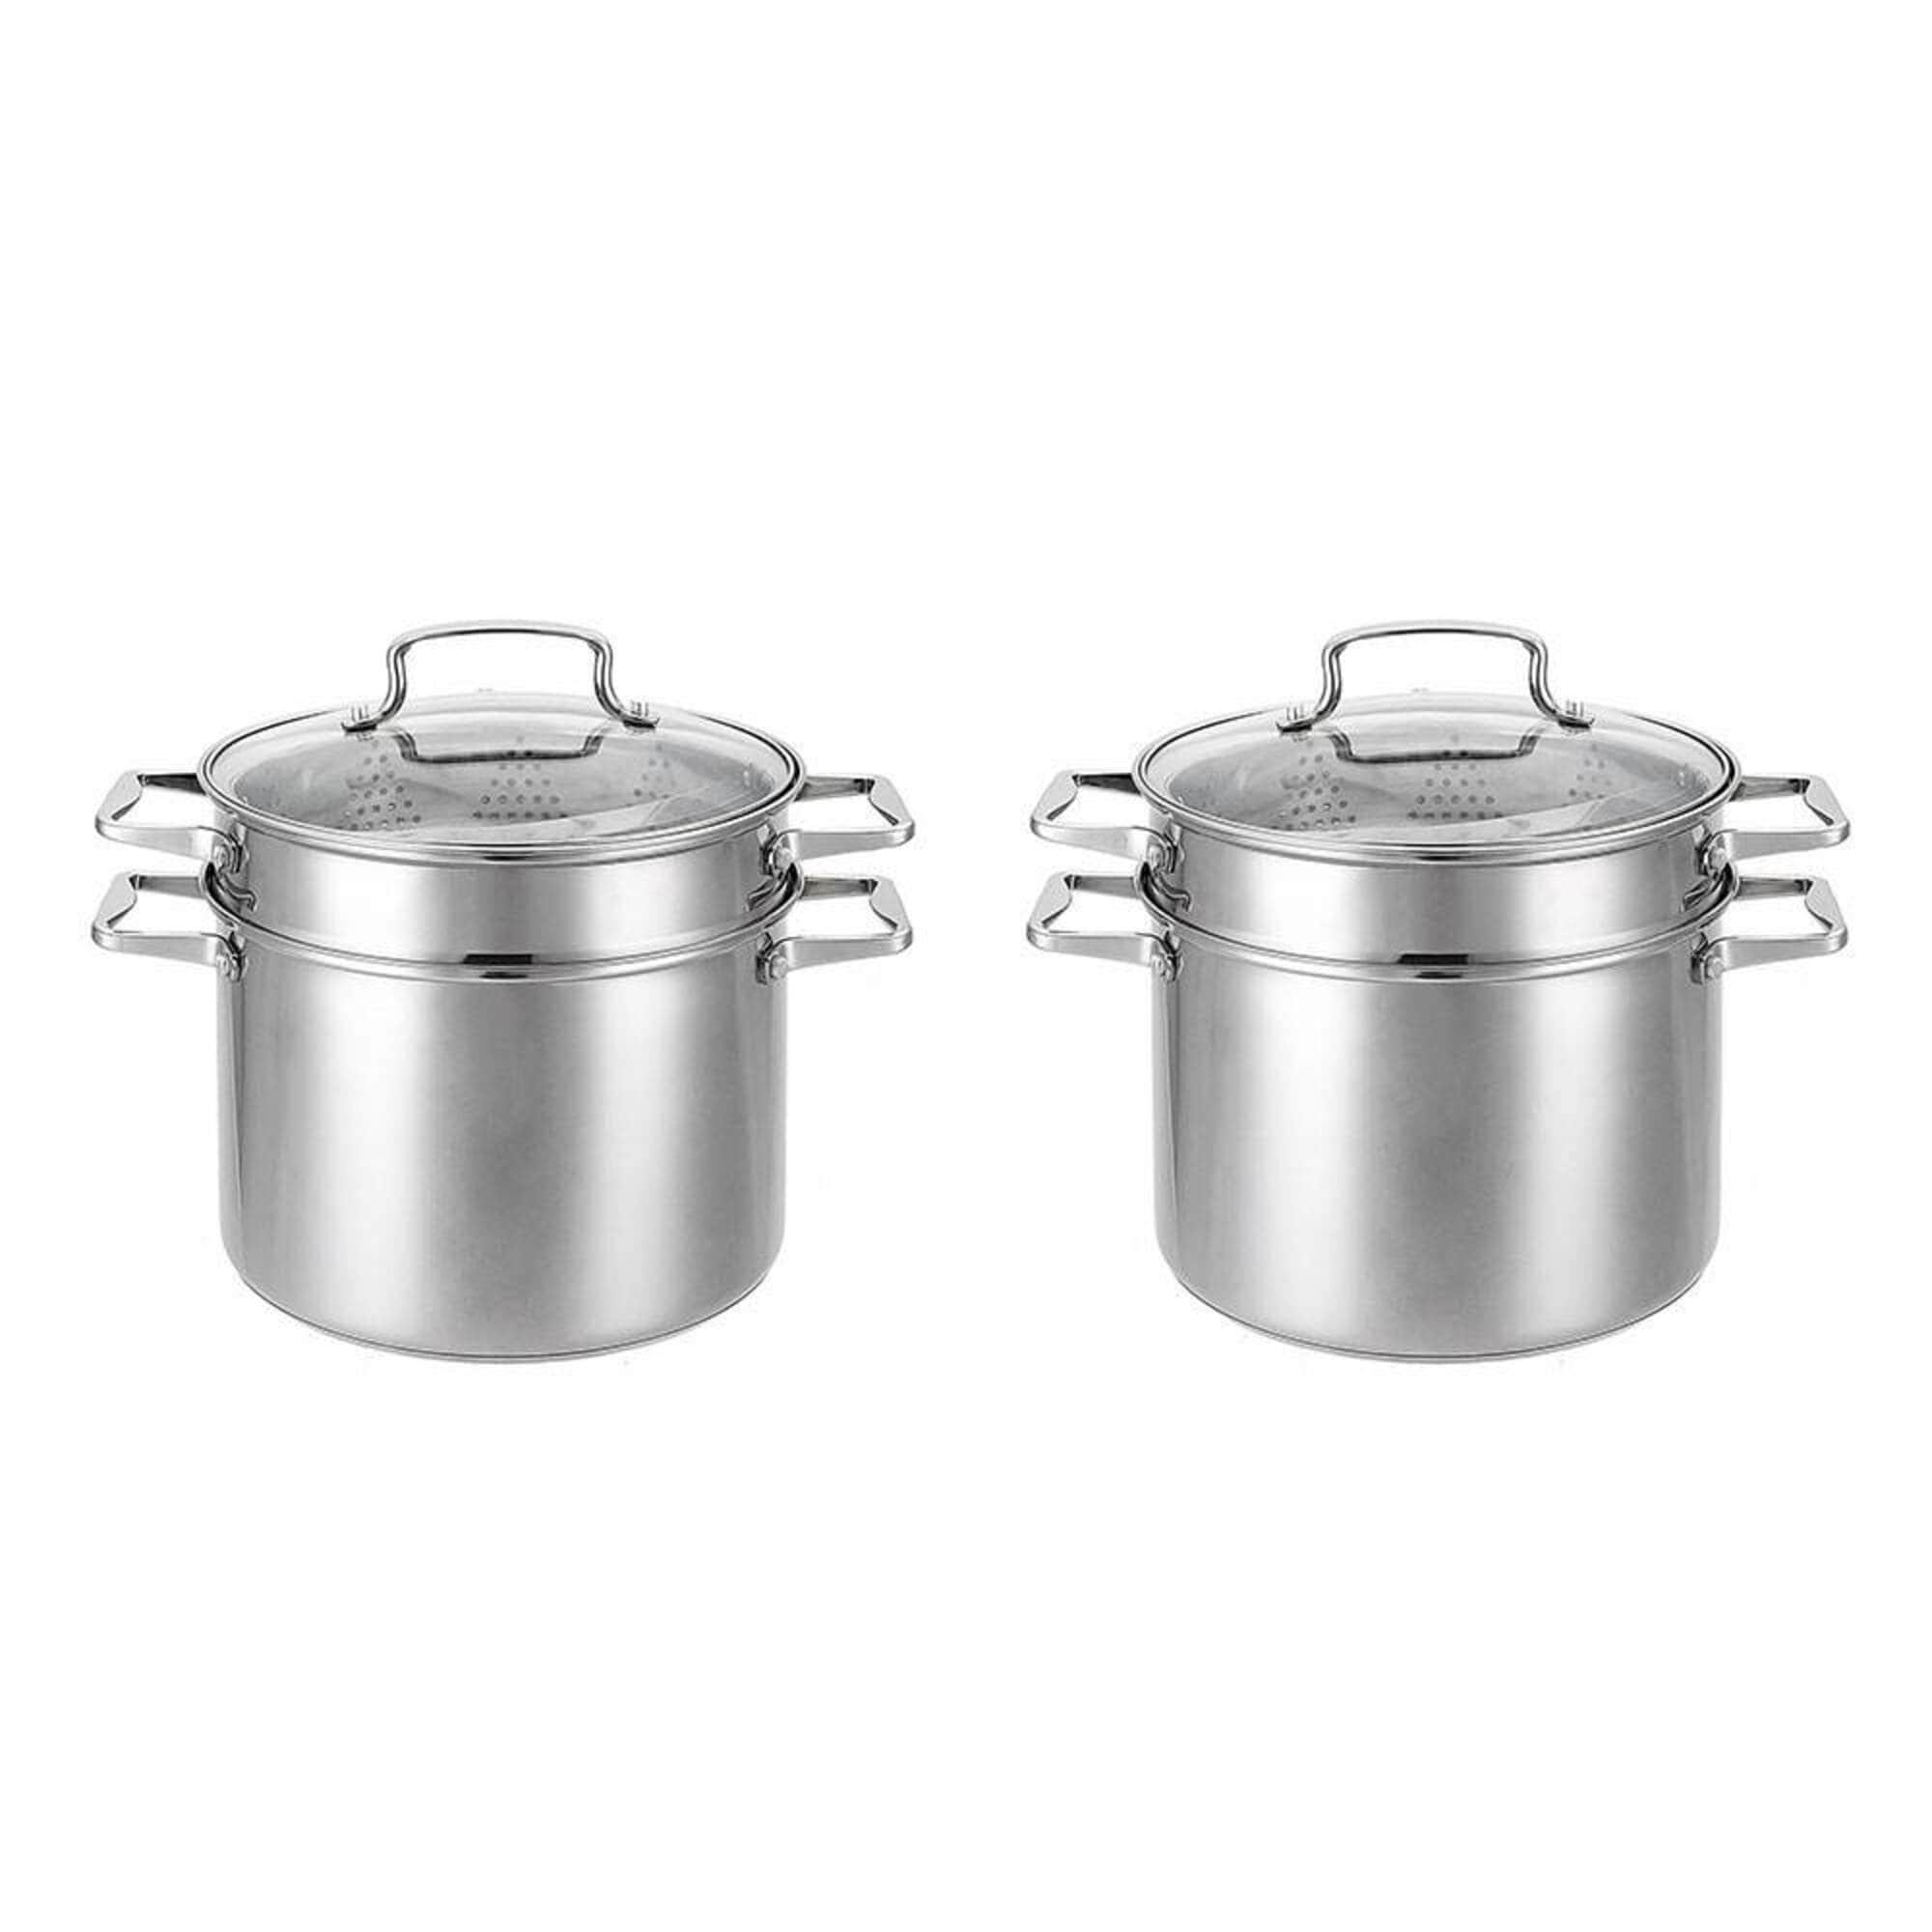 Hamilton Beach 8 qt. Stainless Steel Steamer Pot with Lid